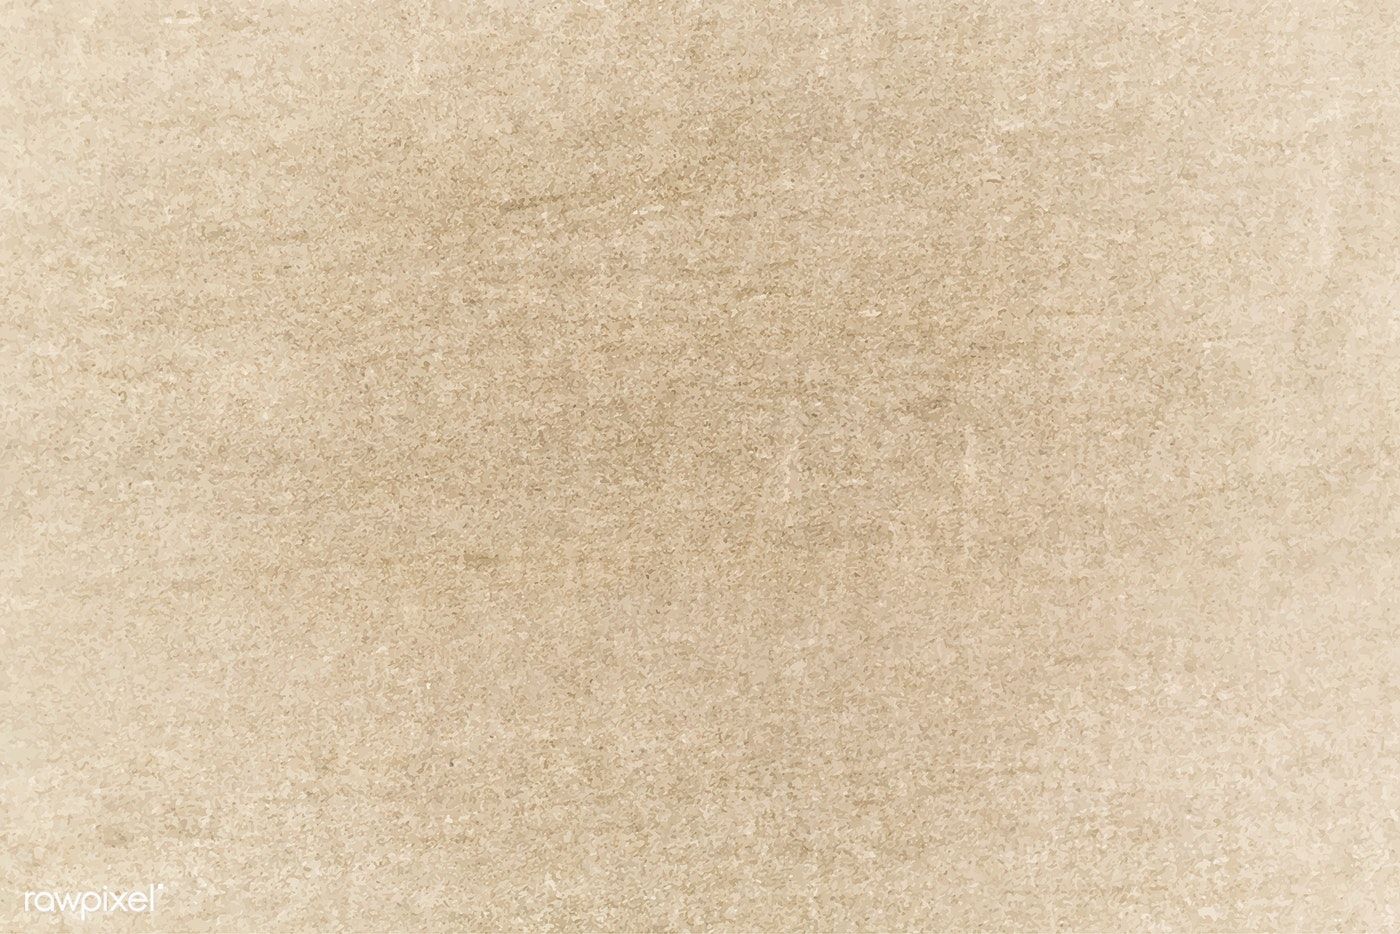 Plain Beige Textured Background Vector Image By Rawpixel